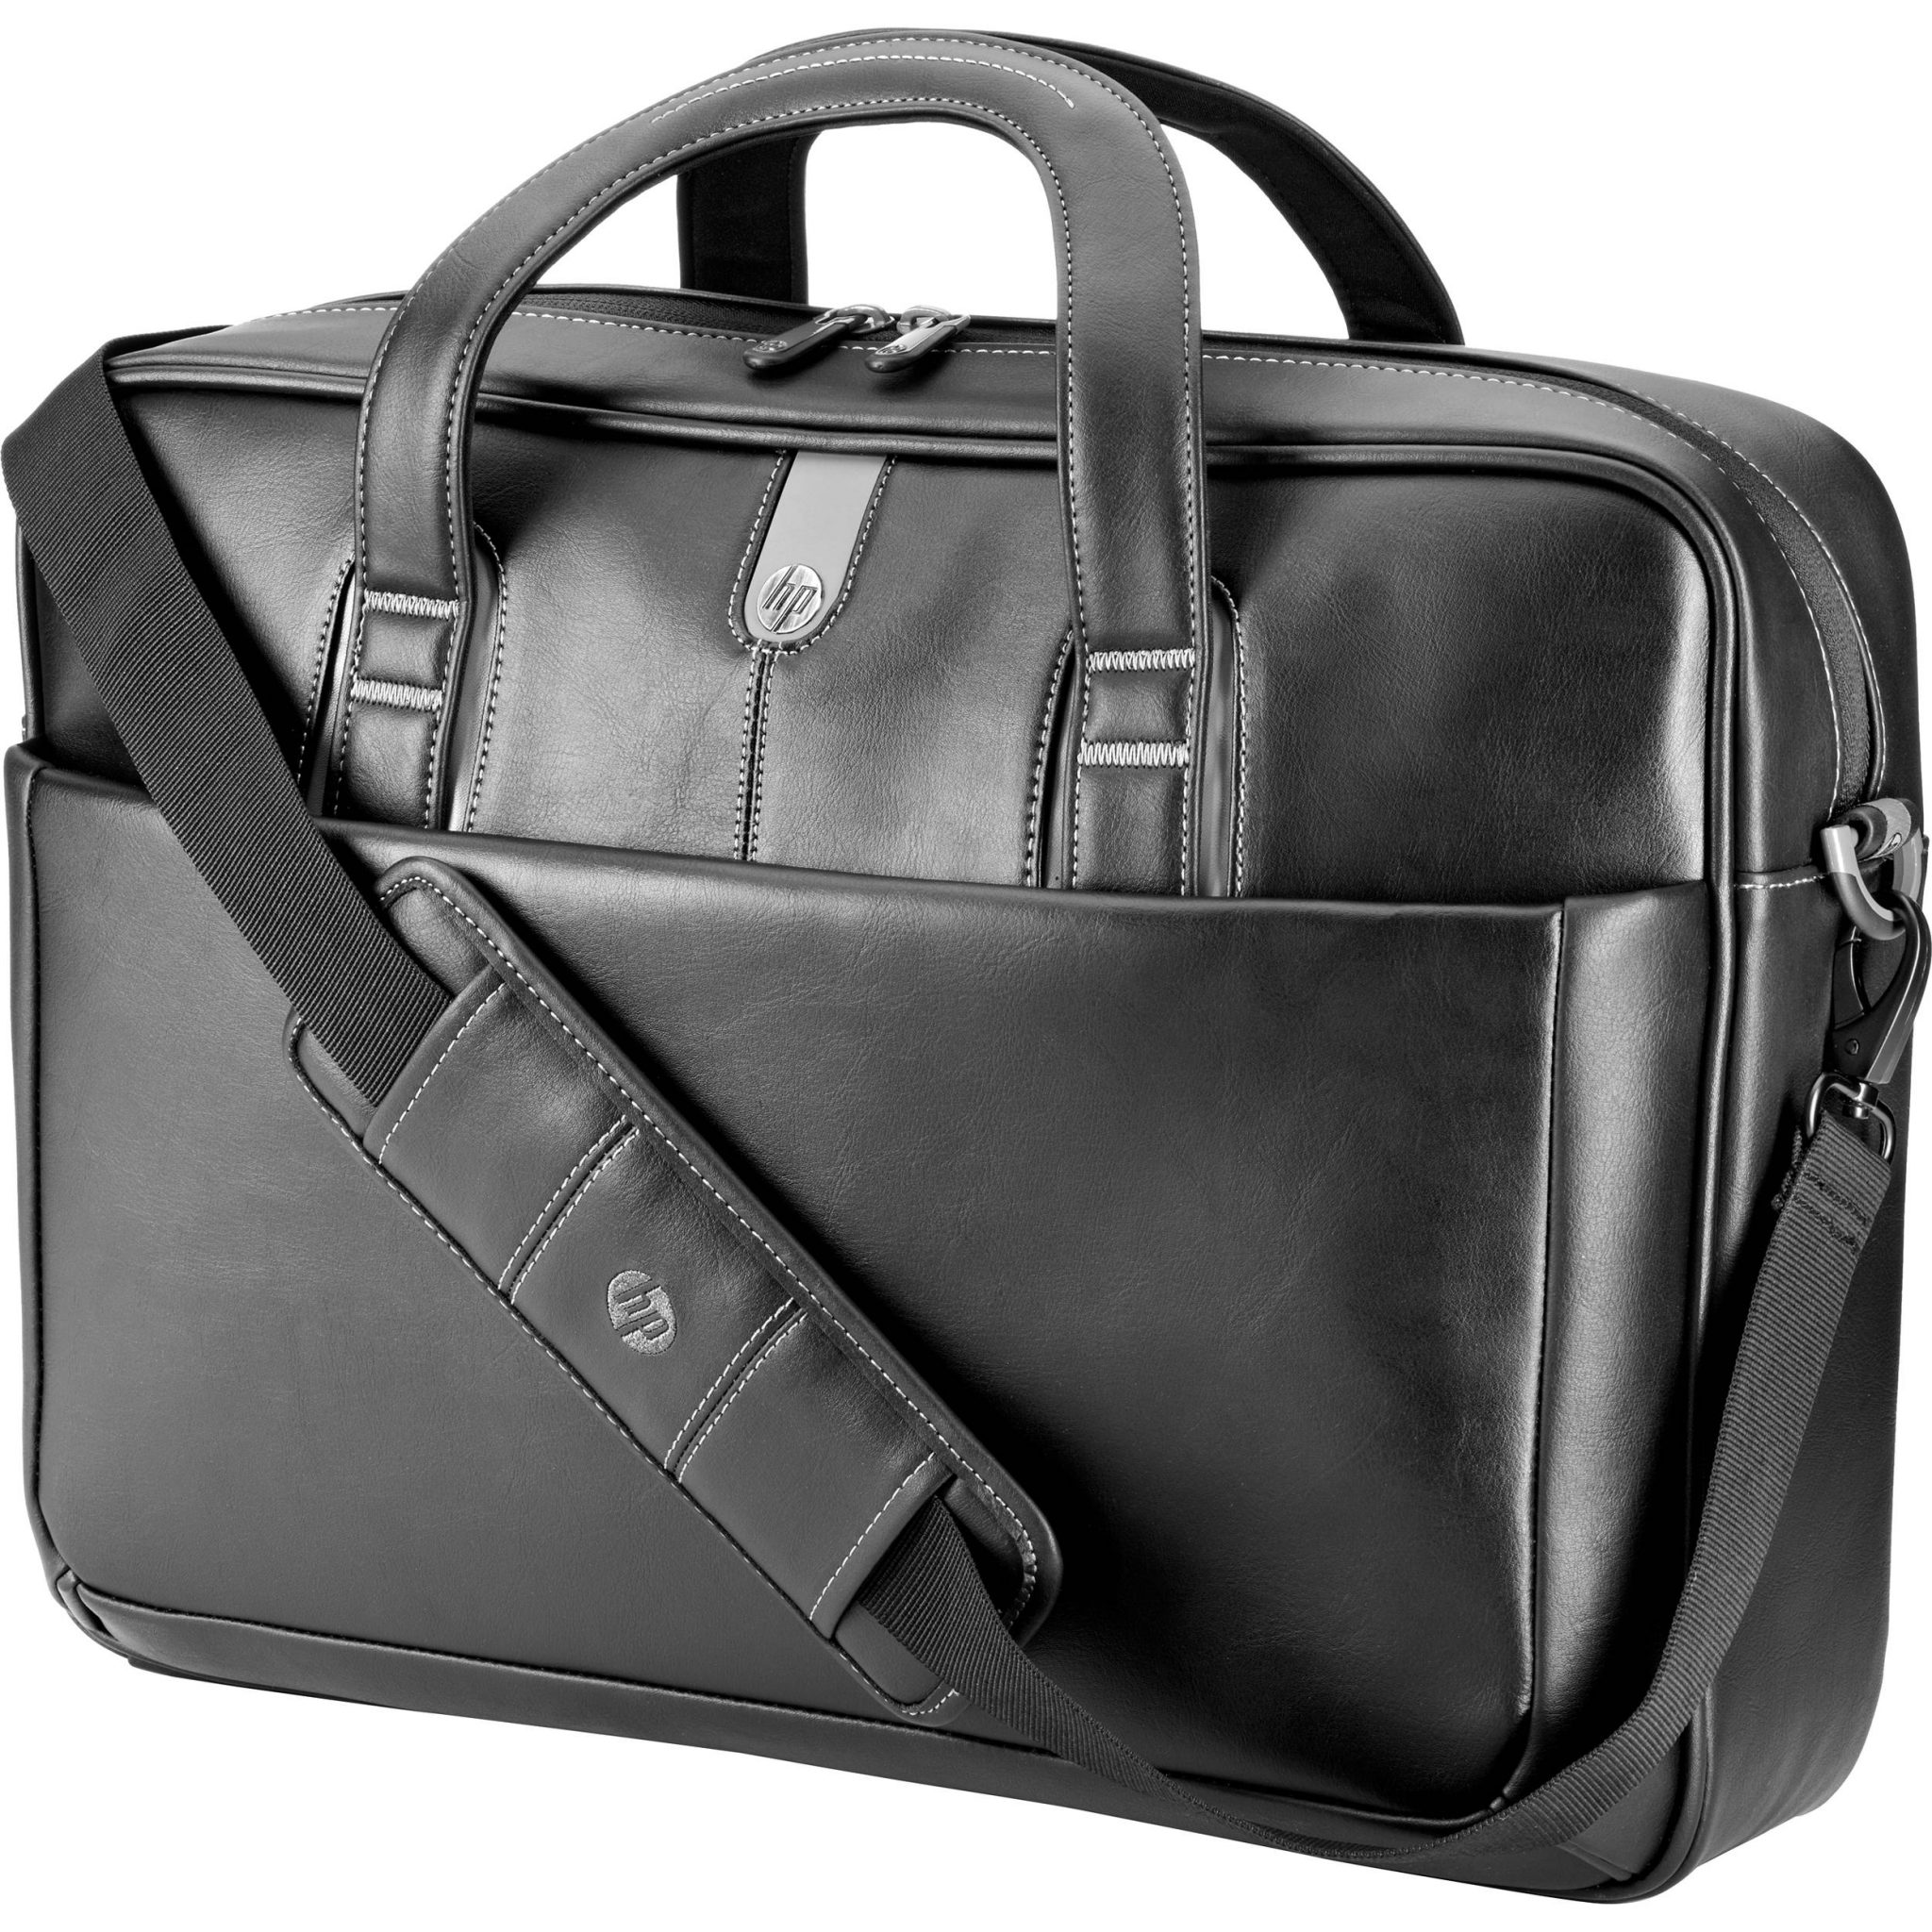 HP PROFESSIONAL LEATHER TOP LOAD LAPTOP BAG - NEW | eBay